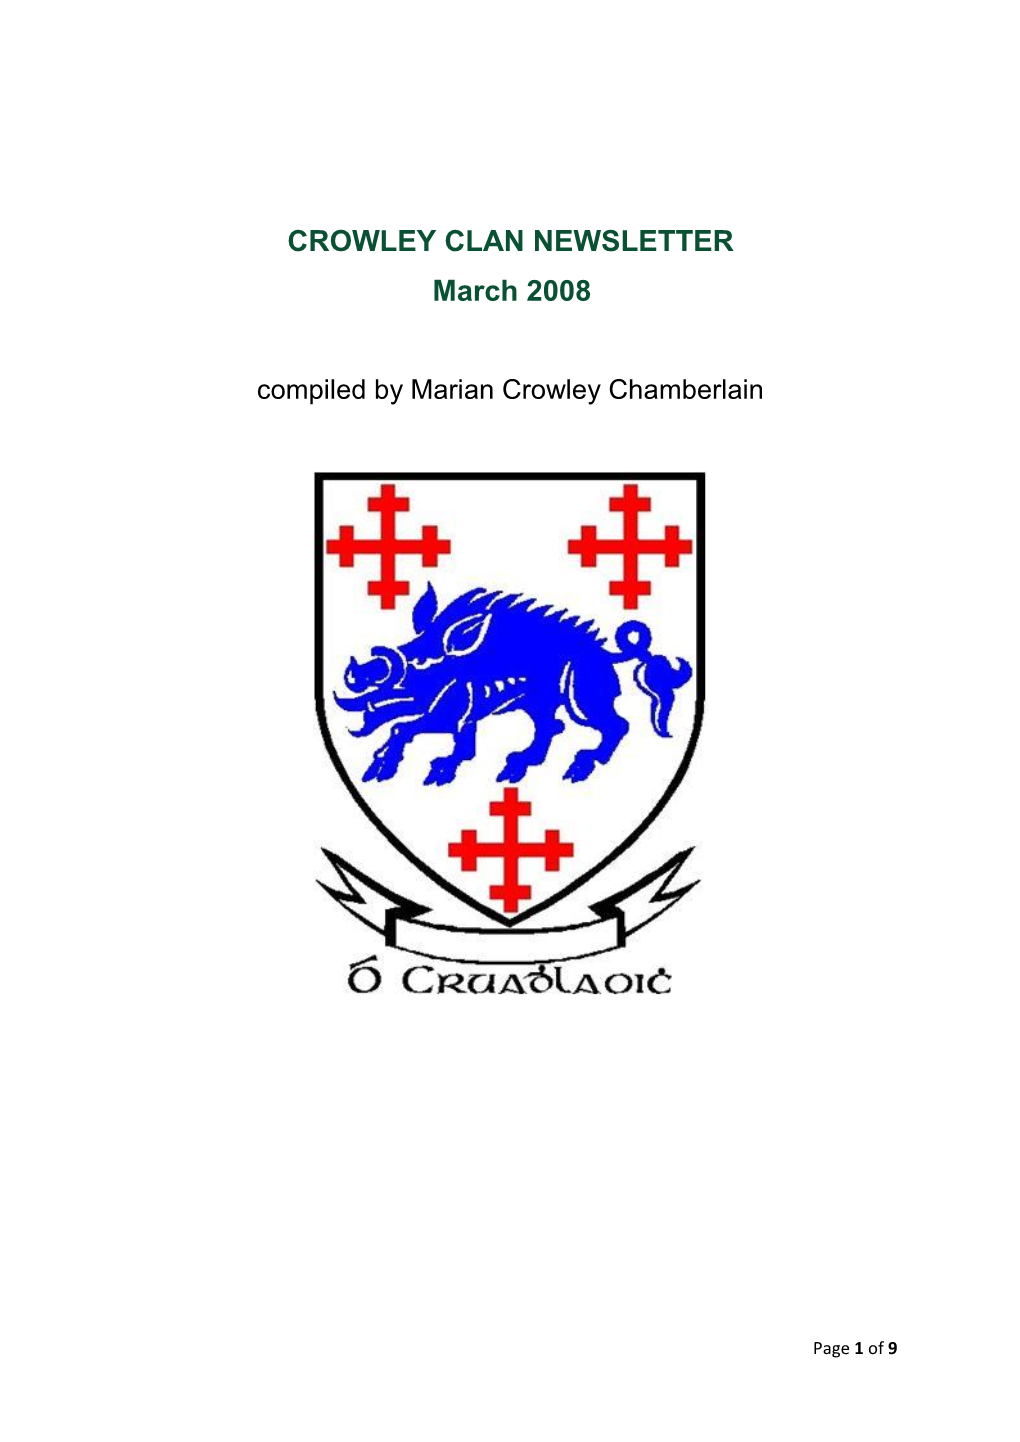 CROWLEY CLAN NEWSLETTER March 2008 Compiled by Marian Crowley Chamberlain